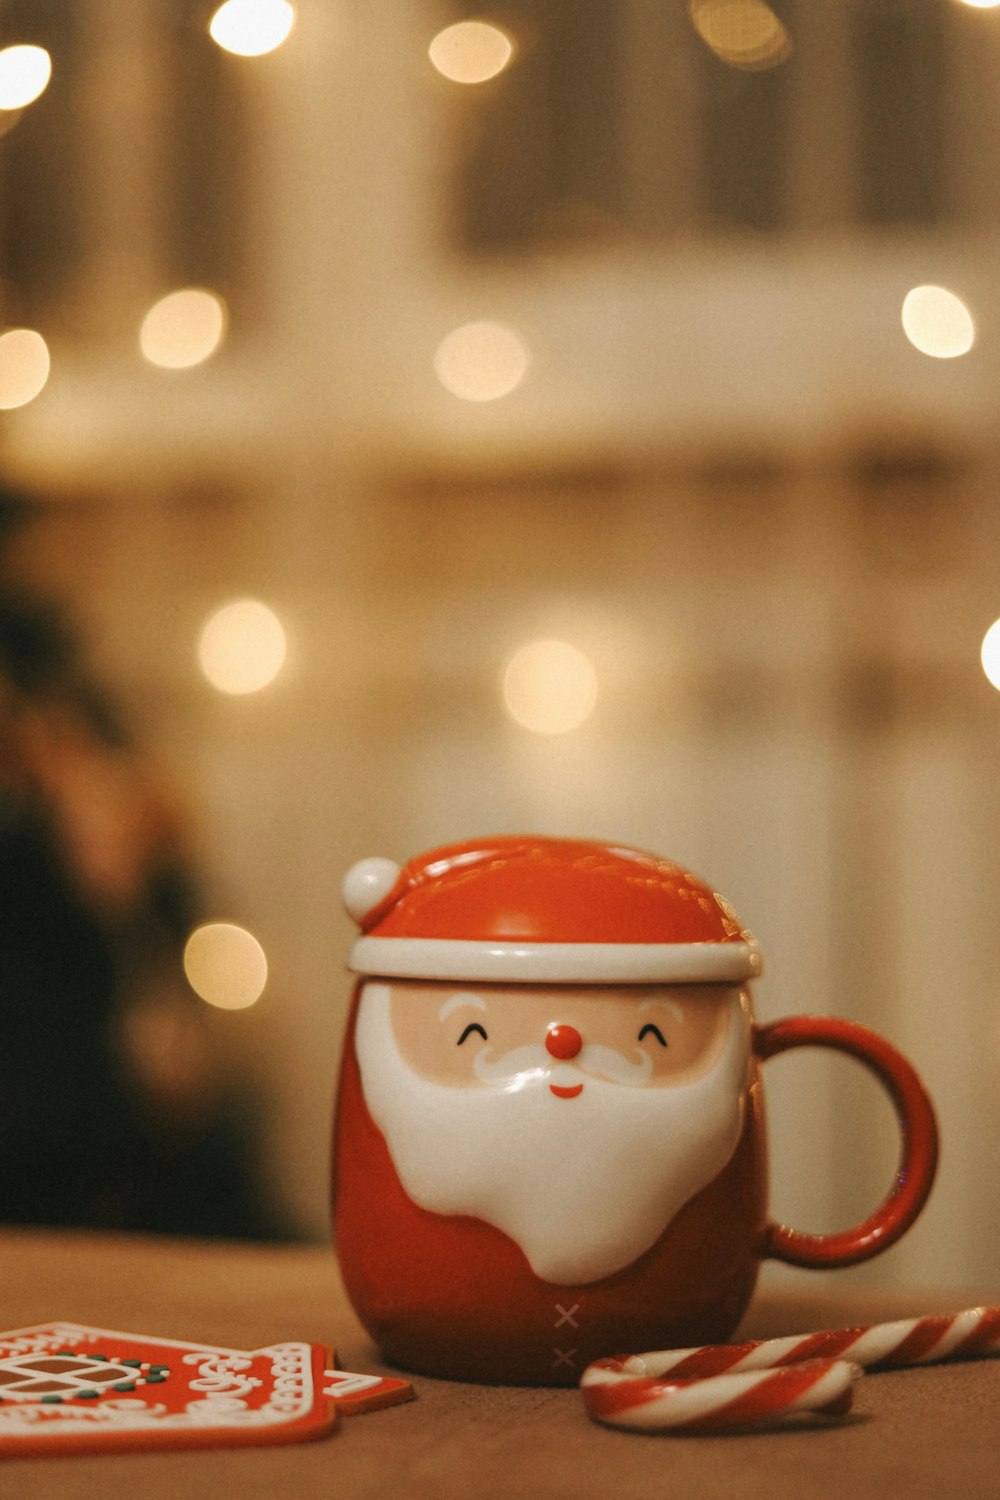 a santa clause mug sitting on a table next to a candy cane